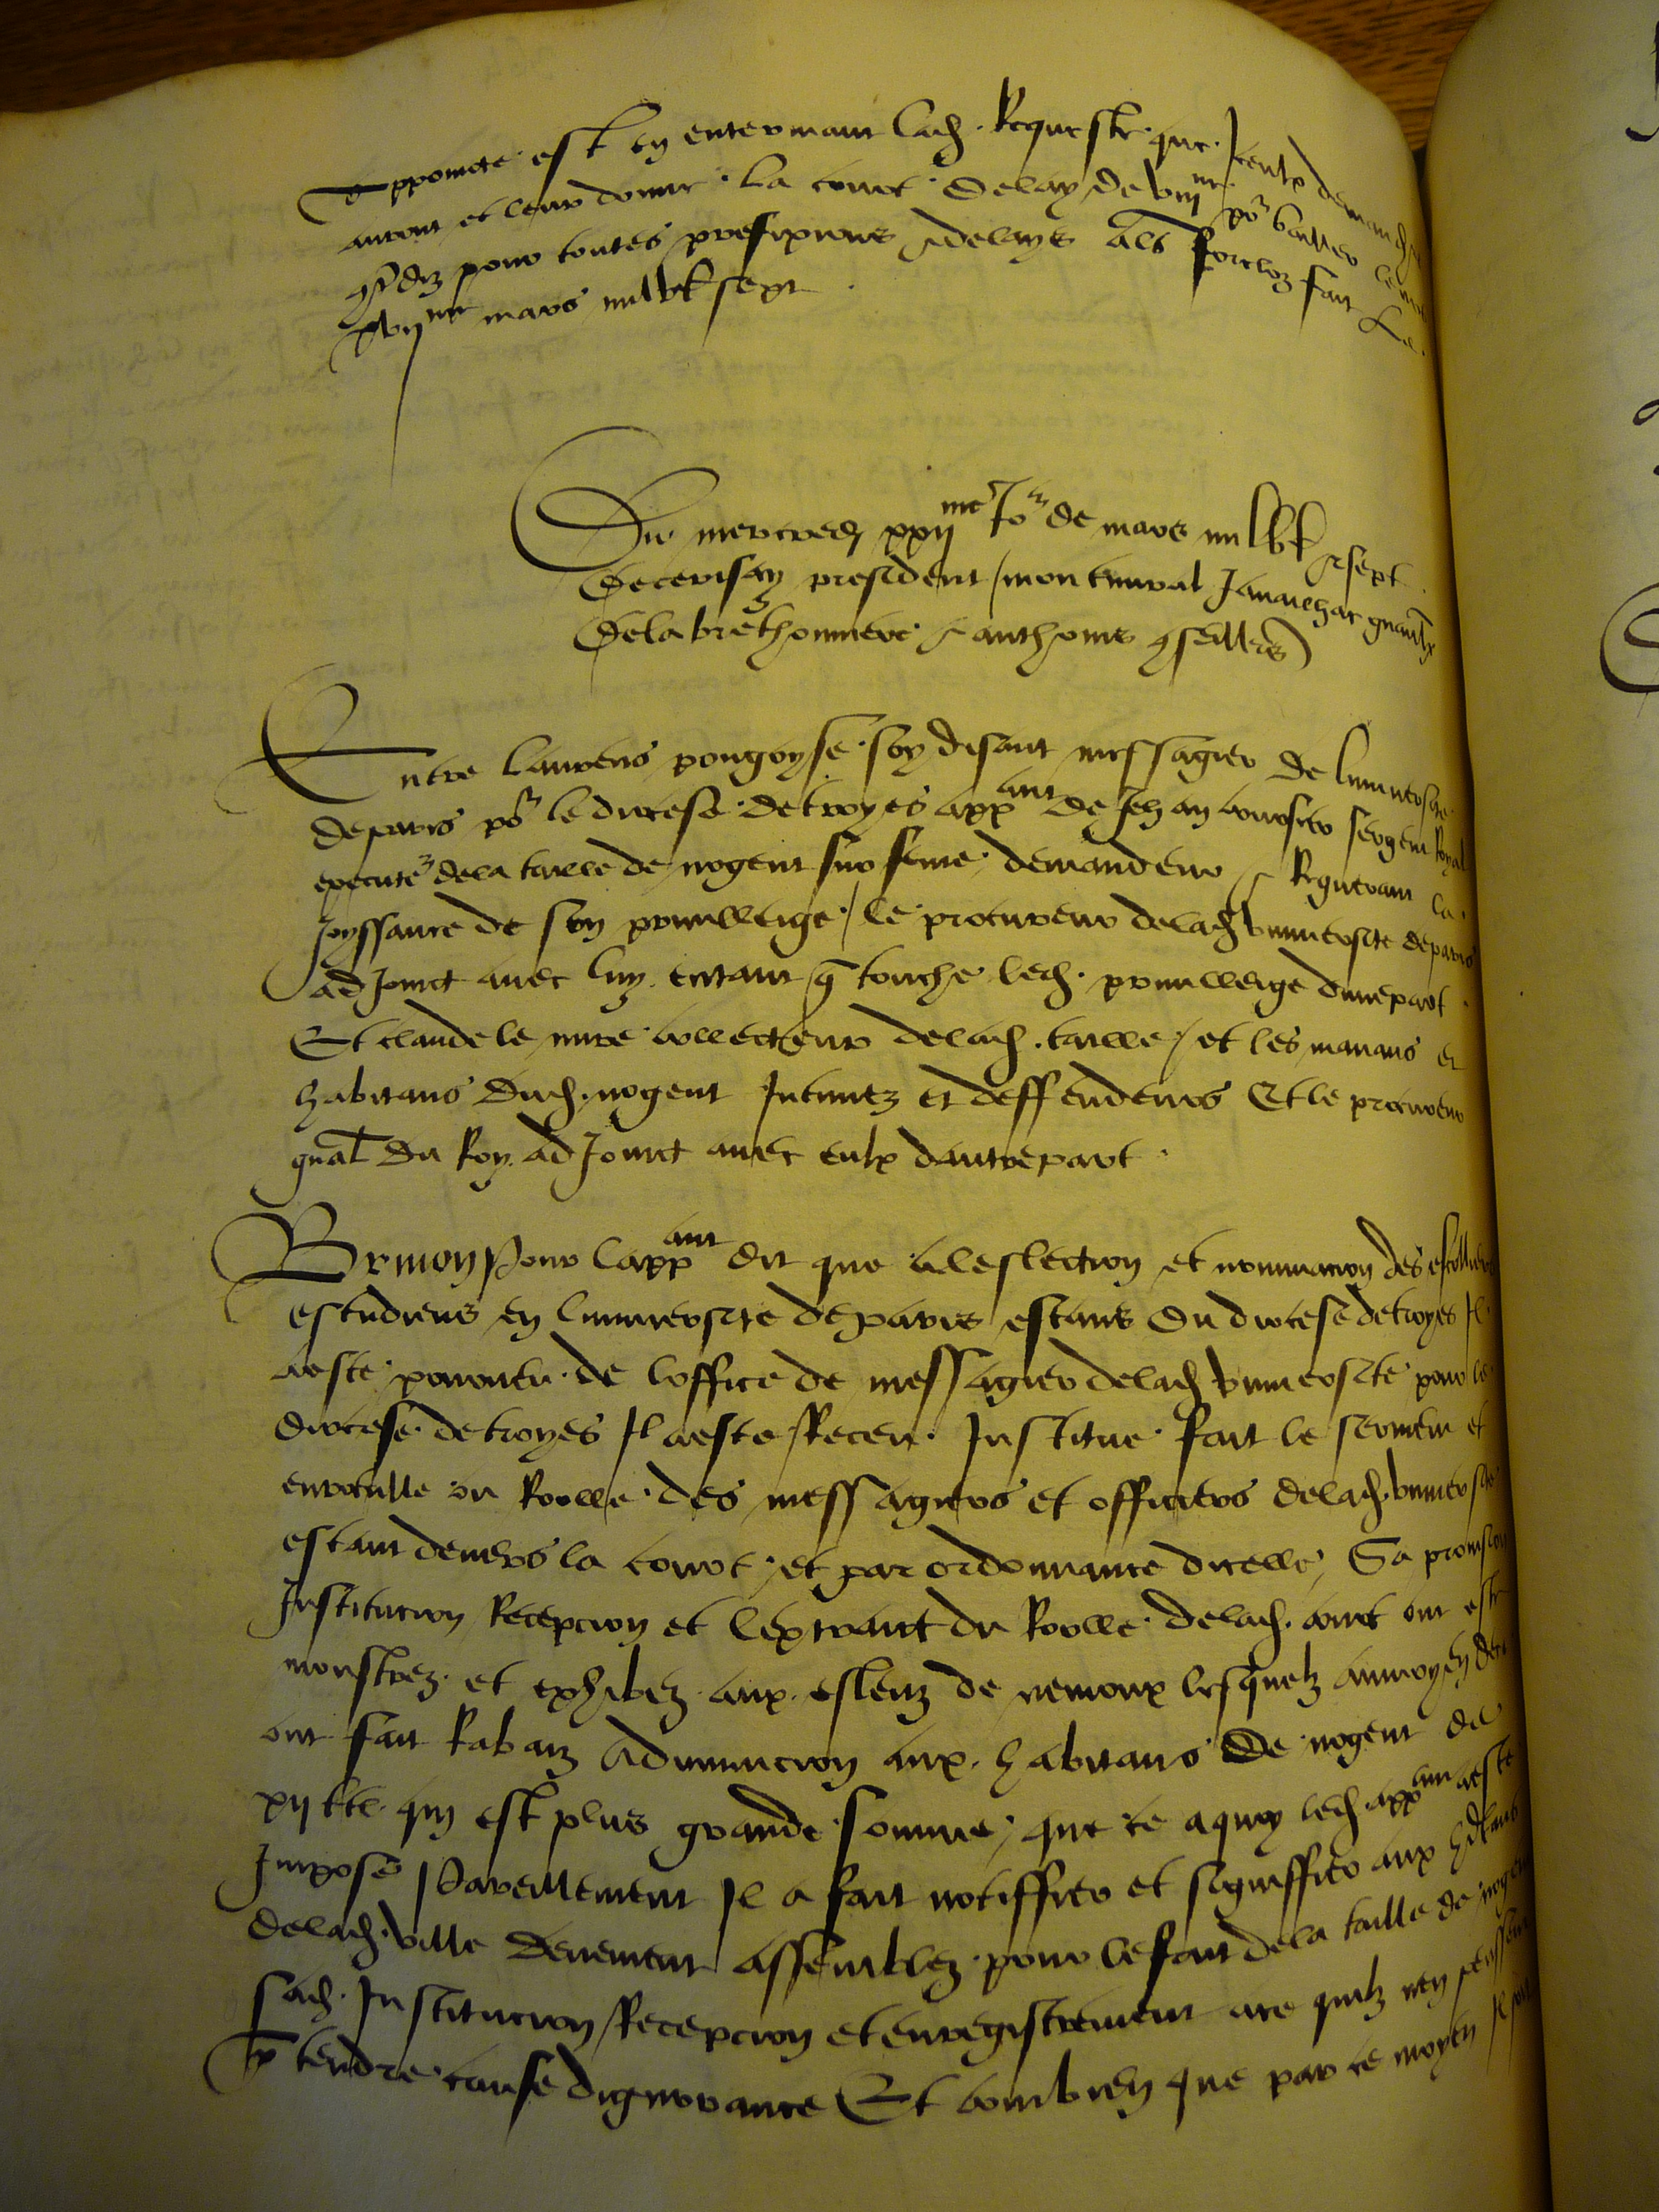 “First page of the minutes of the appeals proceedings of Lambert Pongoyse, 1507, before the Cour des Aides (Arch. Nat. Z1a 35 f. 364v).